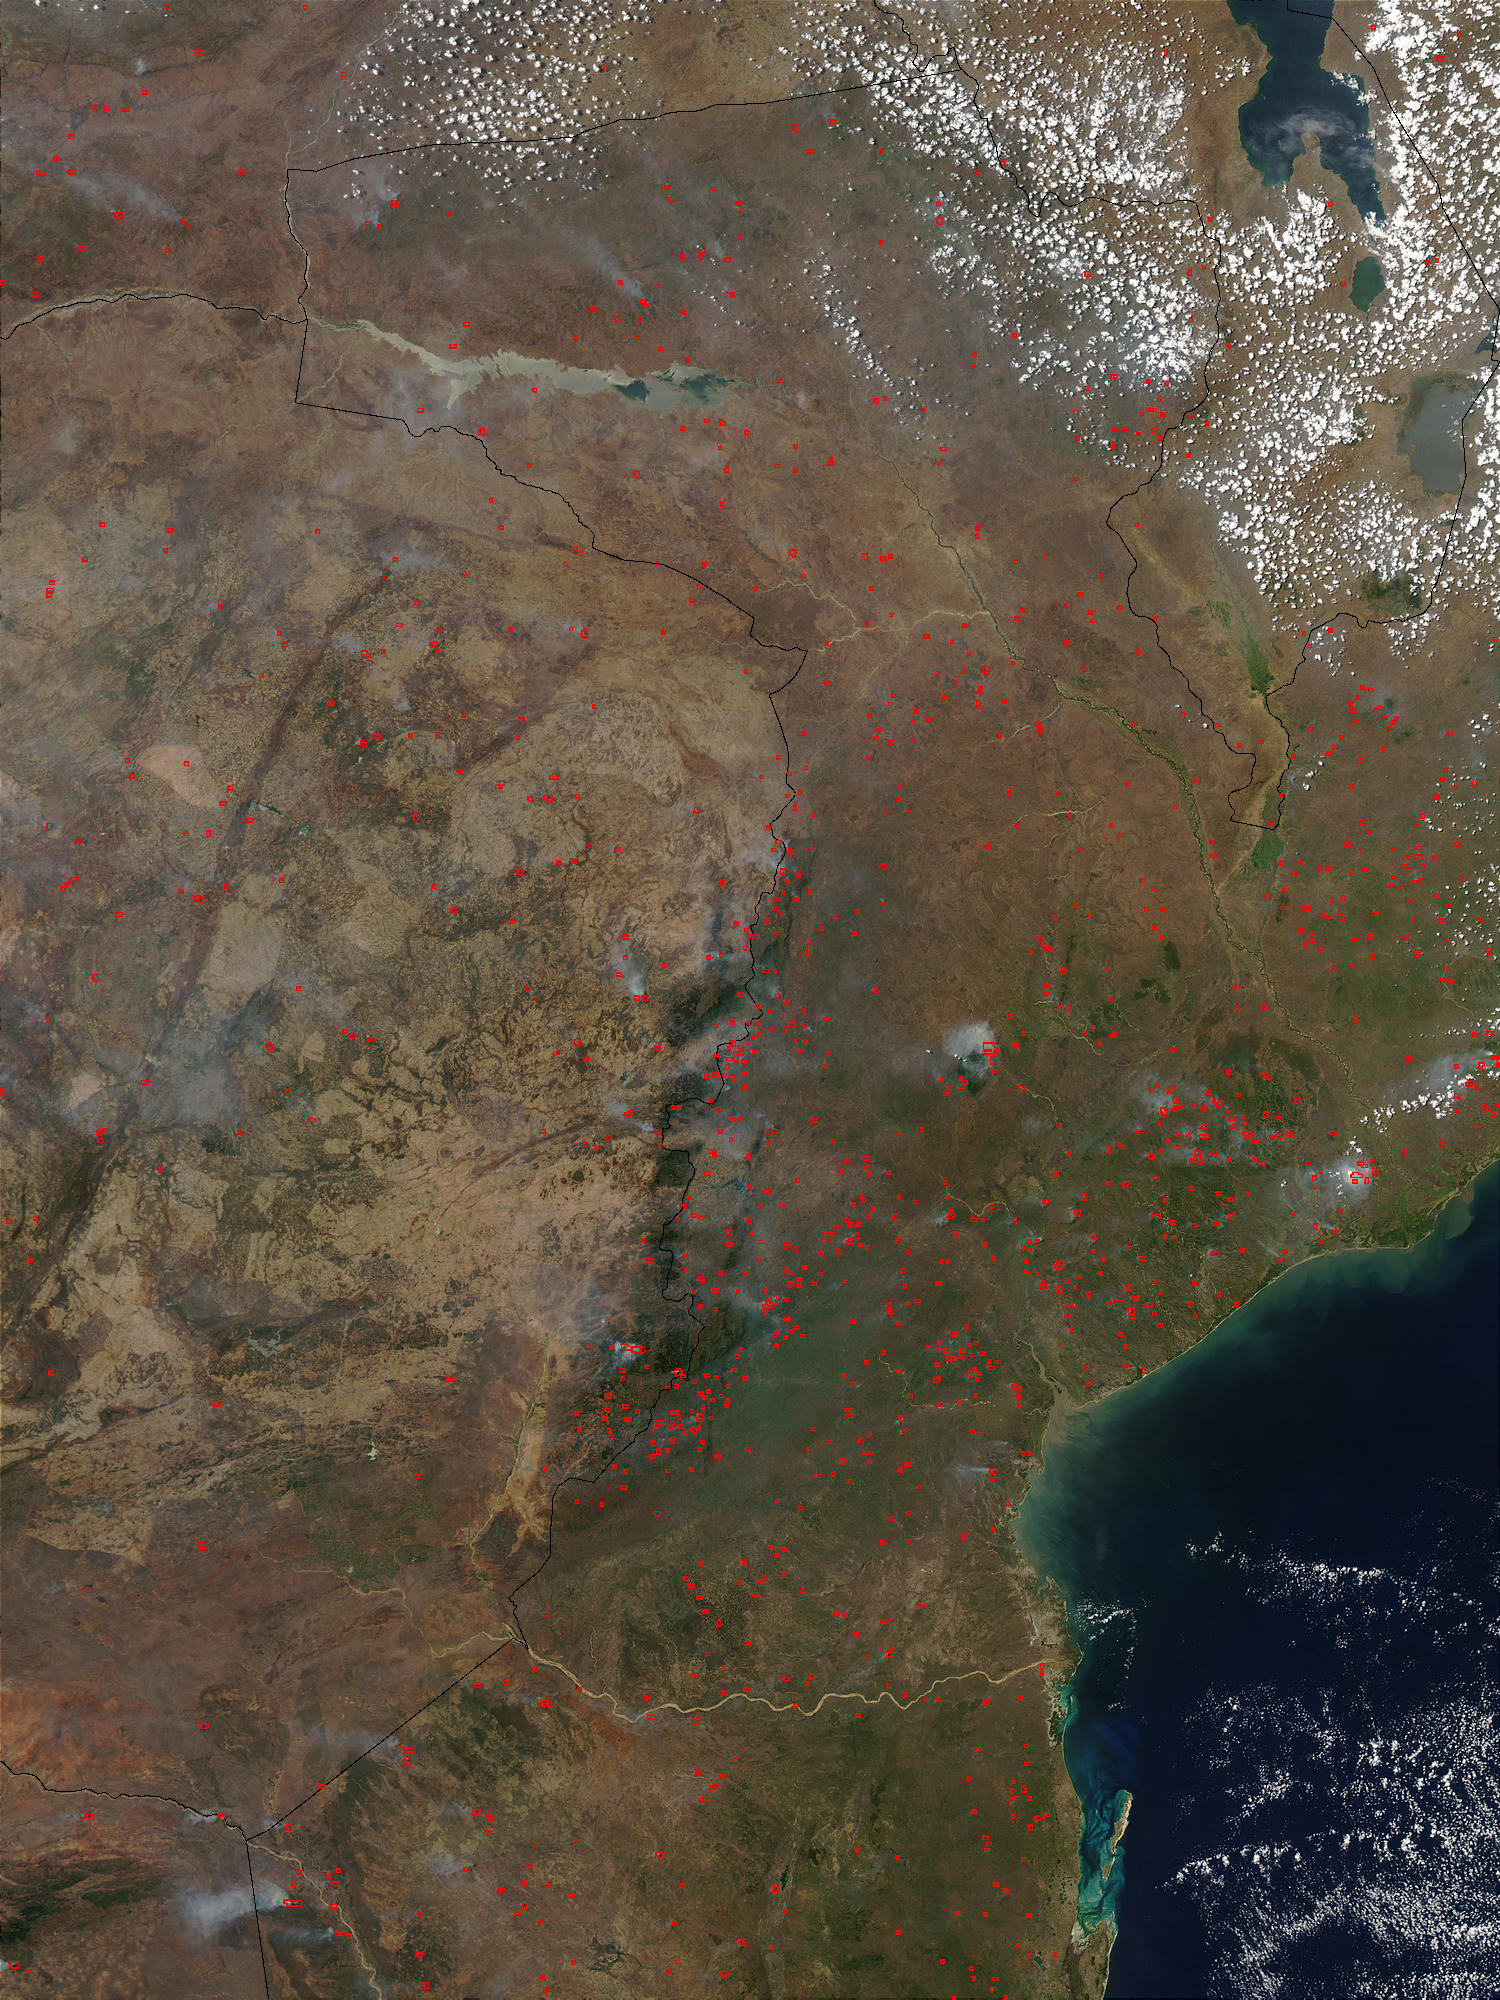 Fires in Mozambique and Zimbabwe - related image preview